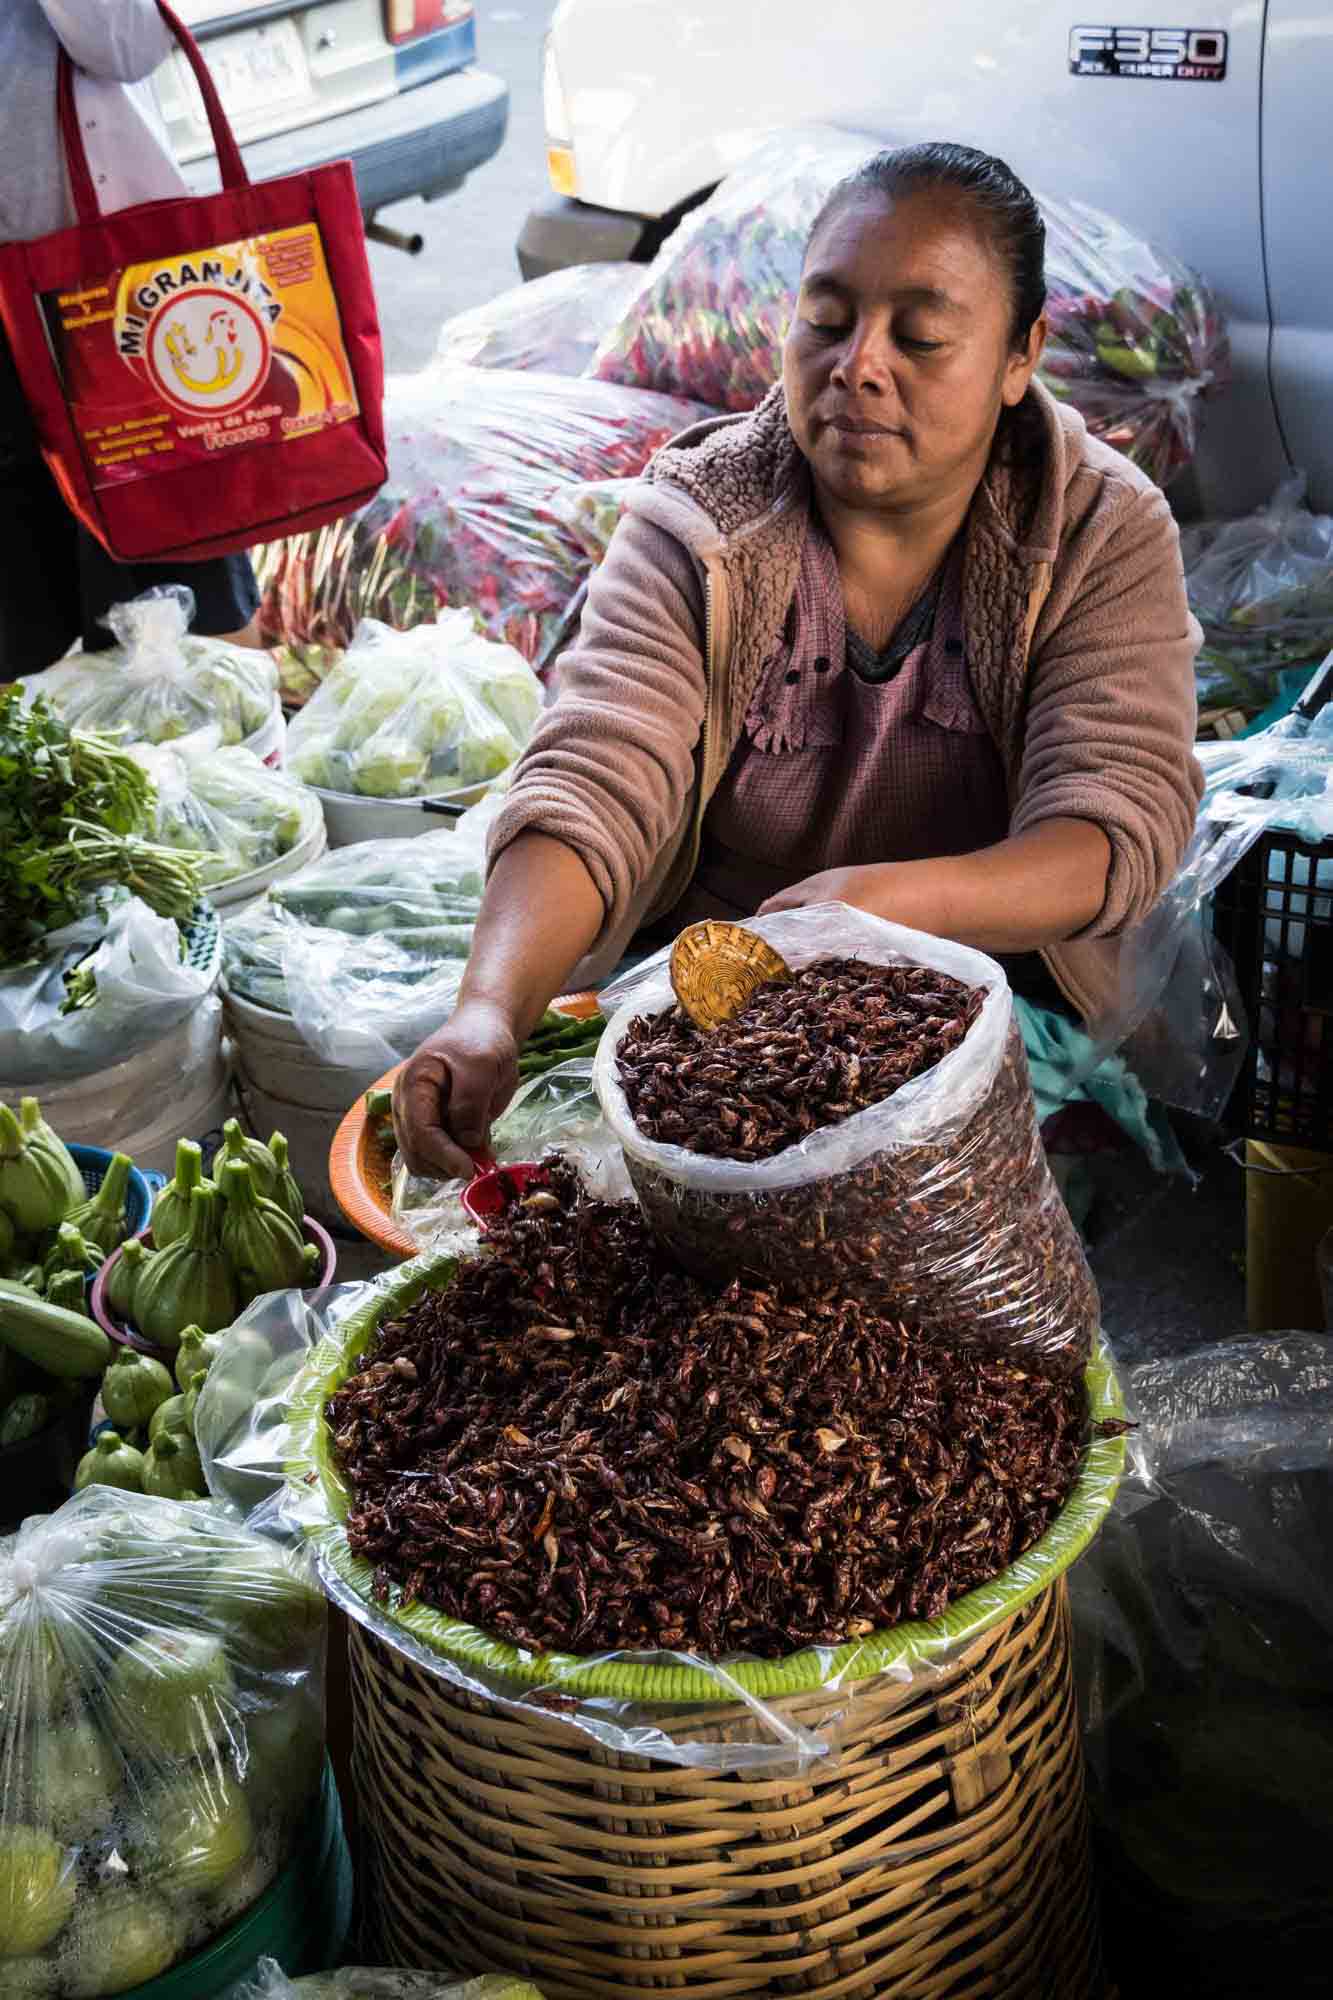 A woman sells grasshoppers or chapulines in the Oaxaca market